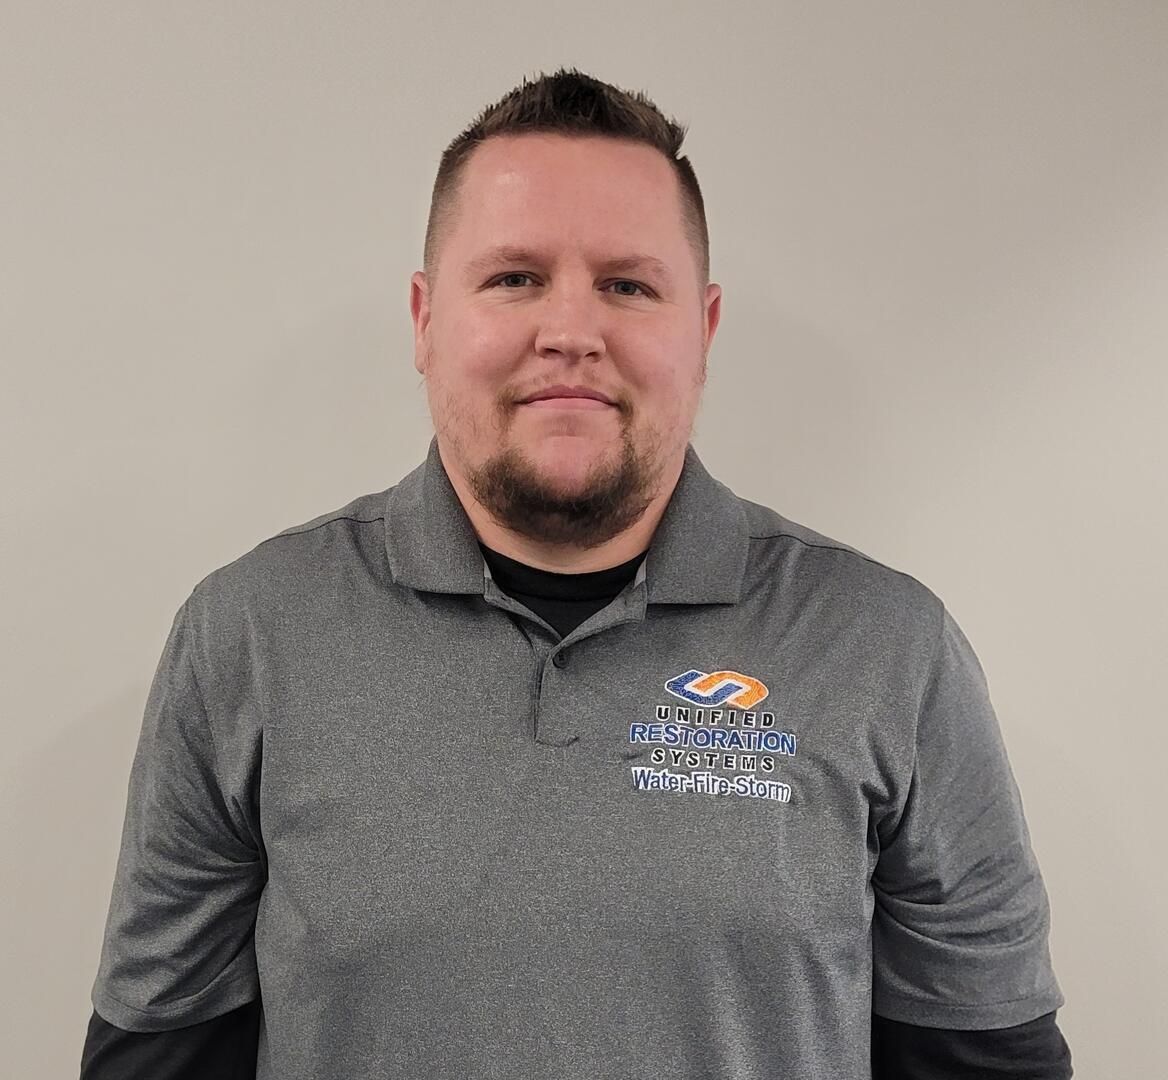 Sr. Estimator, Cody Walker, with Unified Restoration Systems located in Akron, OH